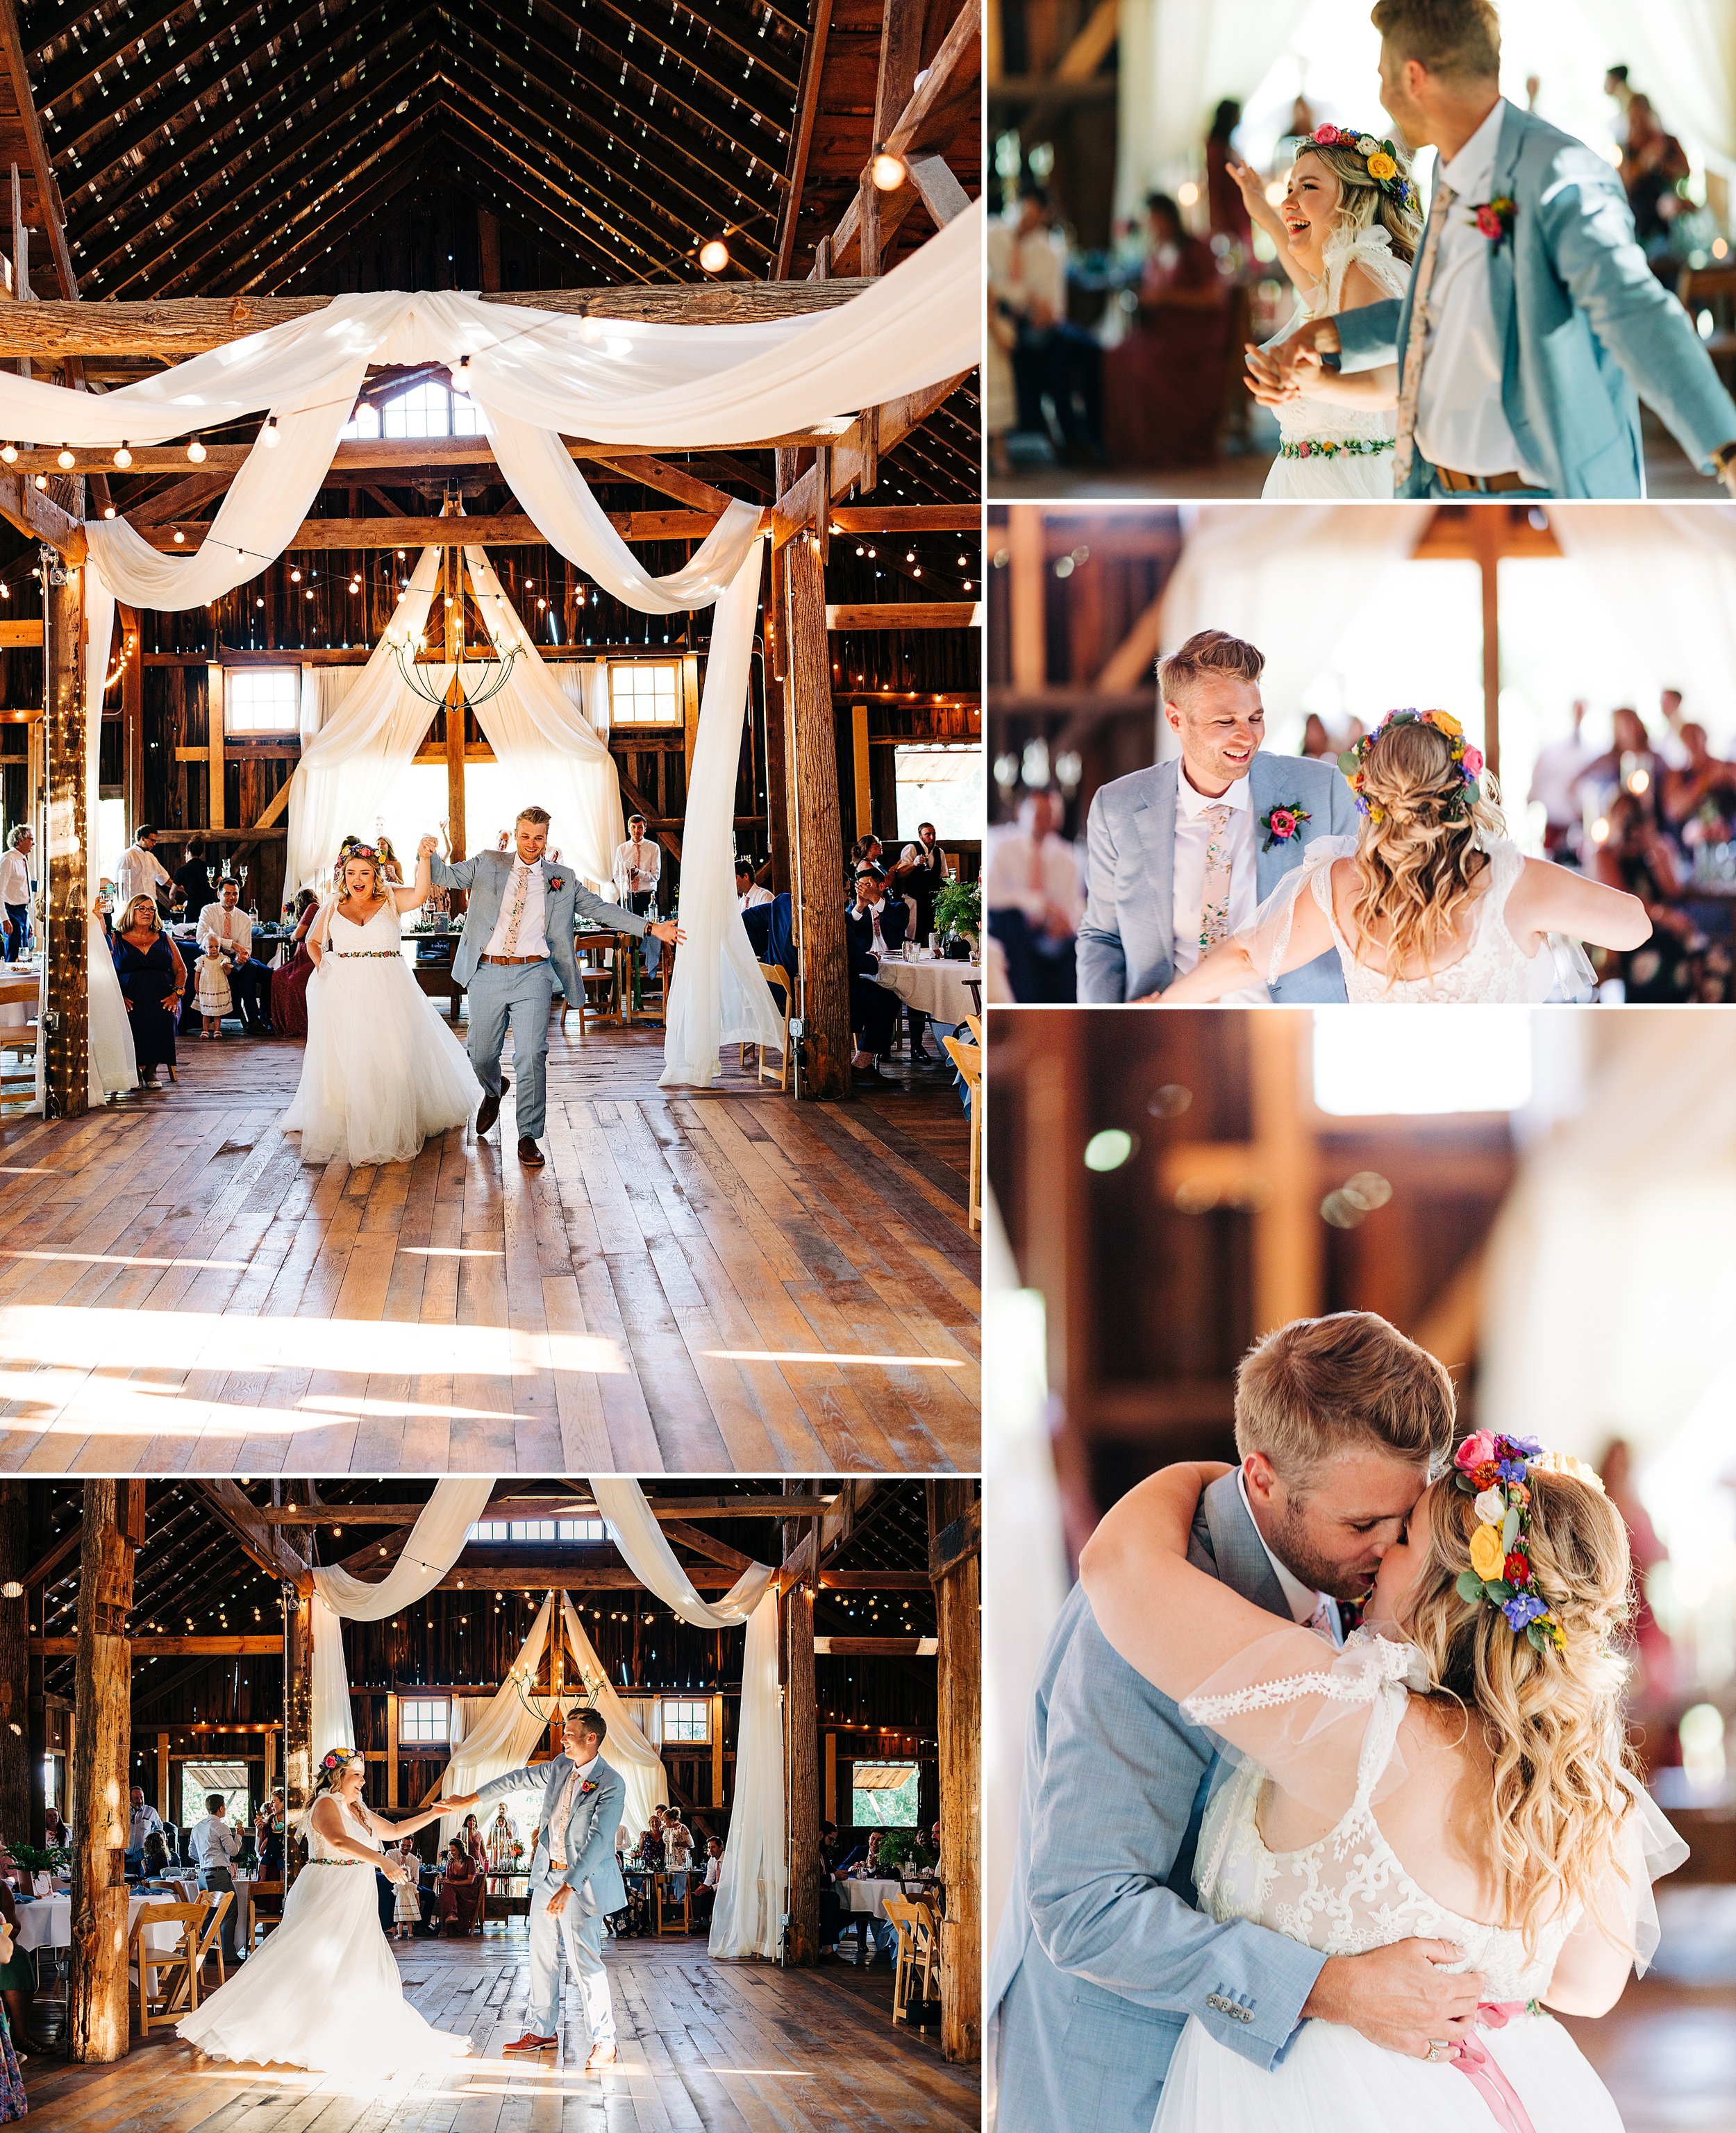 bride and groom first dance at barn wedding reception